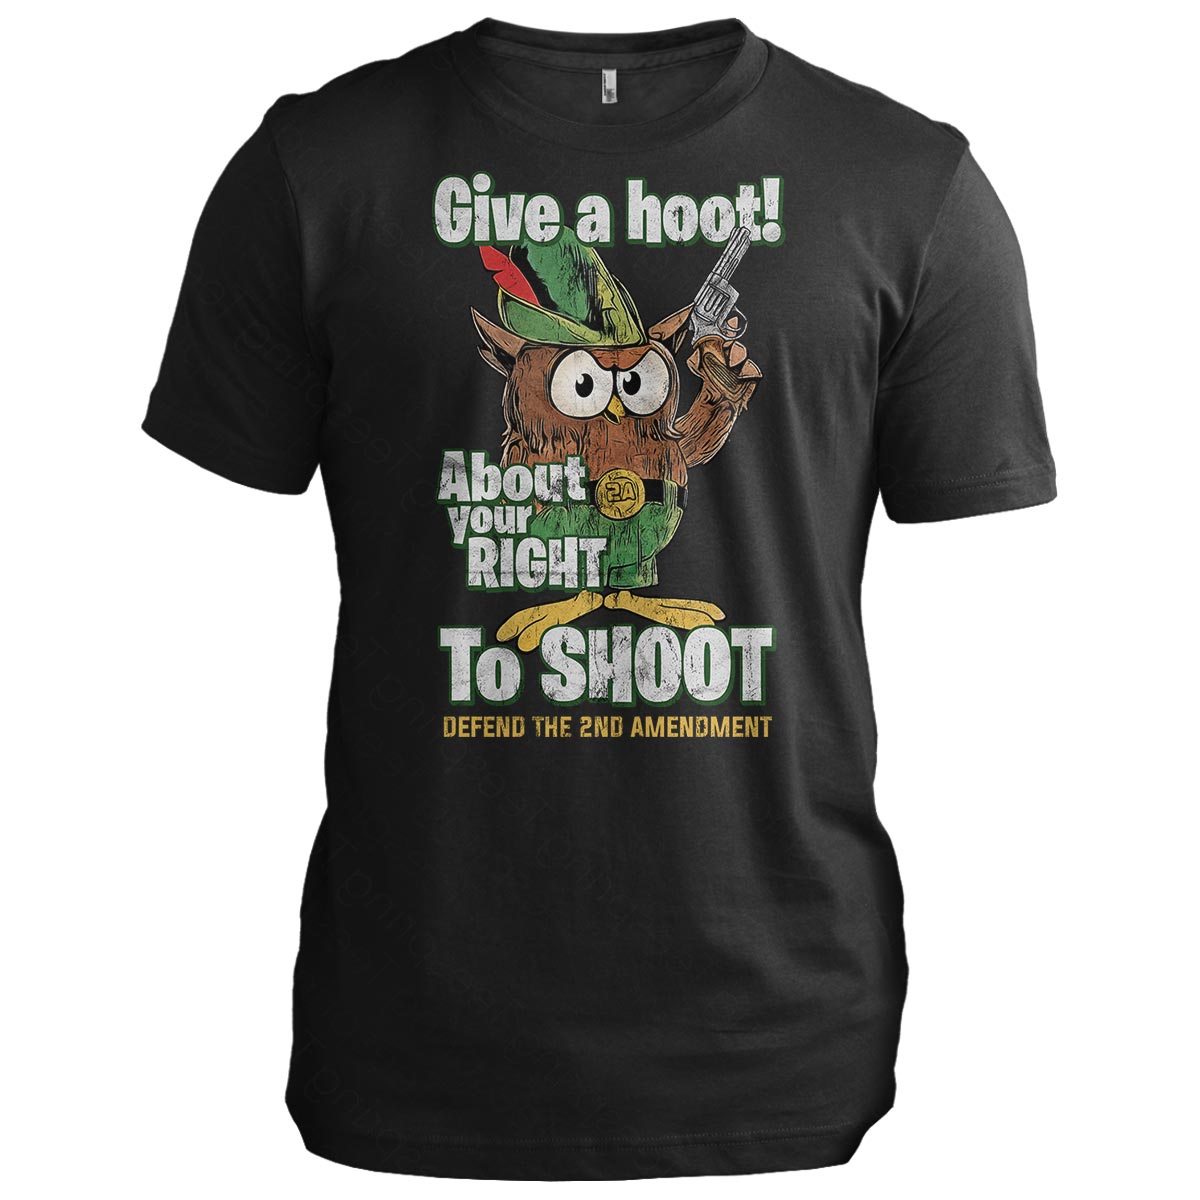 Give a hoot! 2A